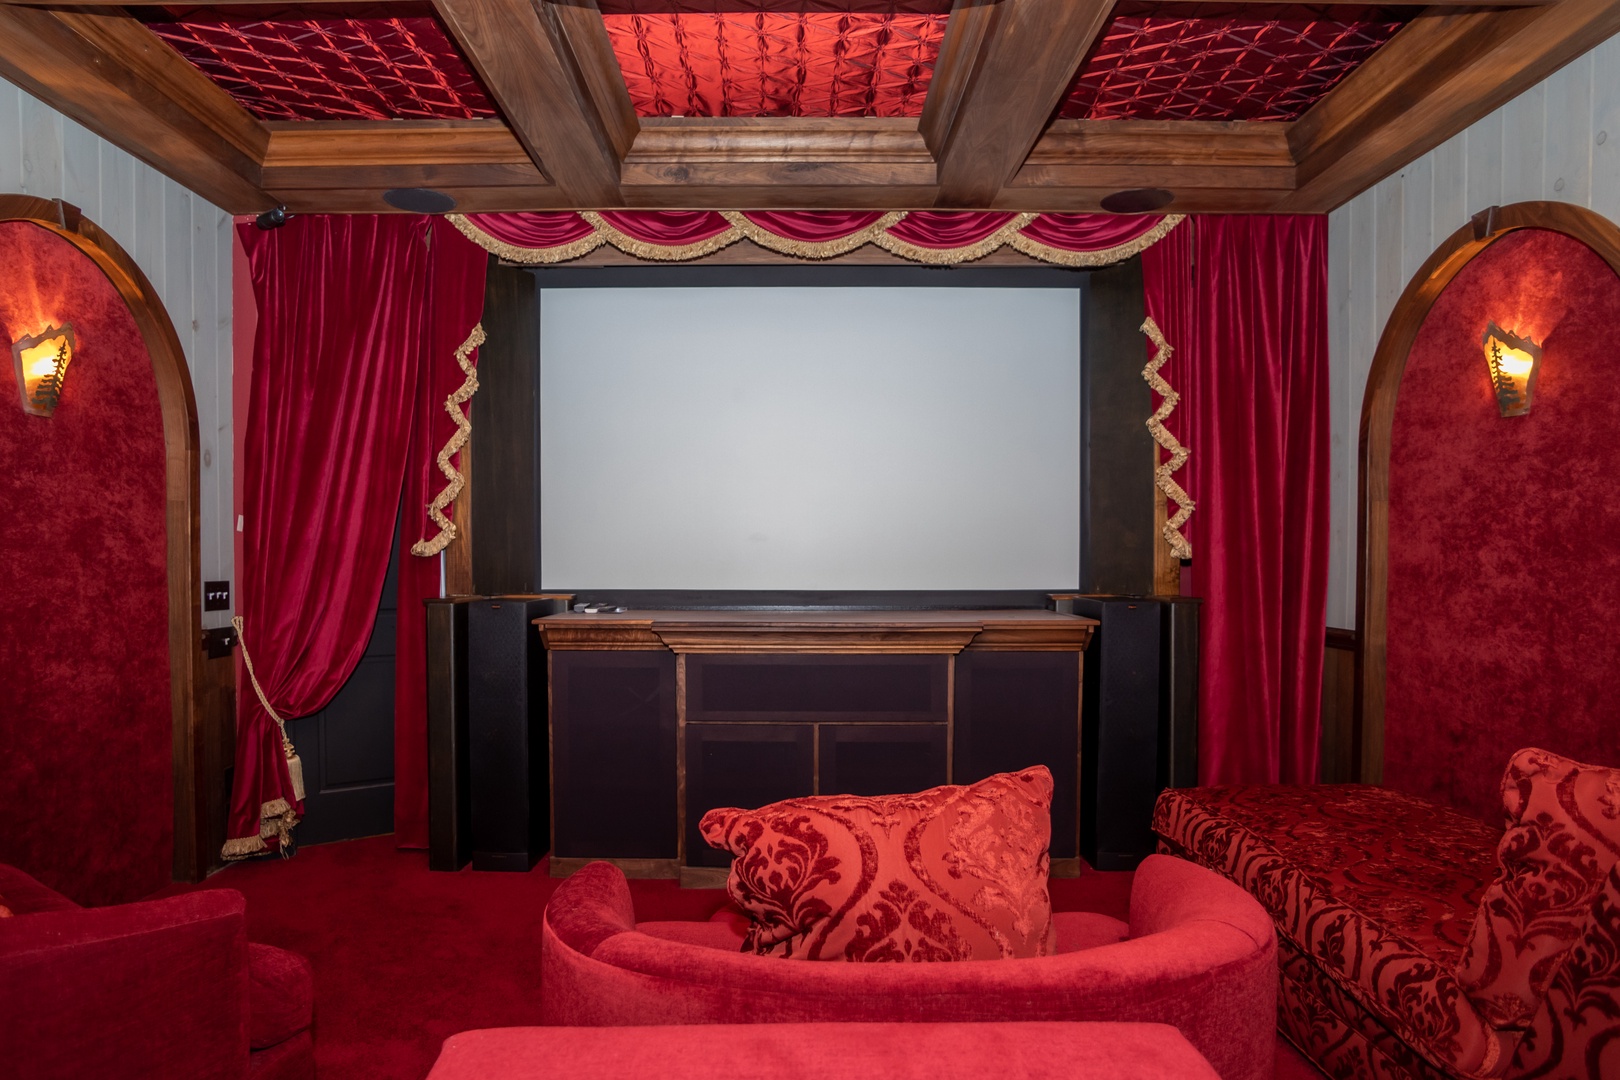 Movie nights are taken to an entirely new level in the posh screening room.